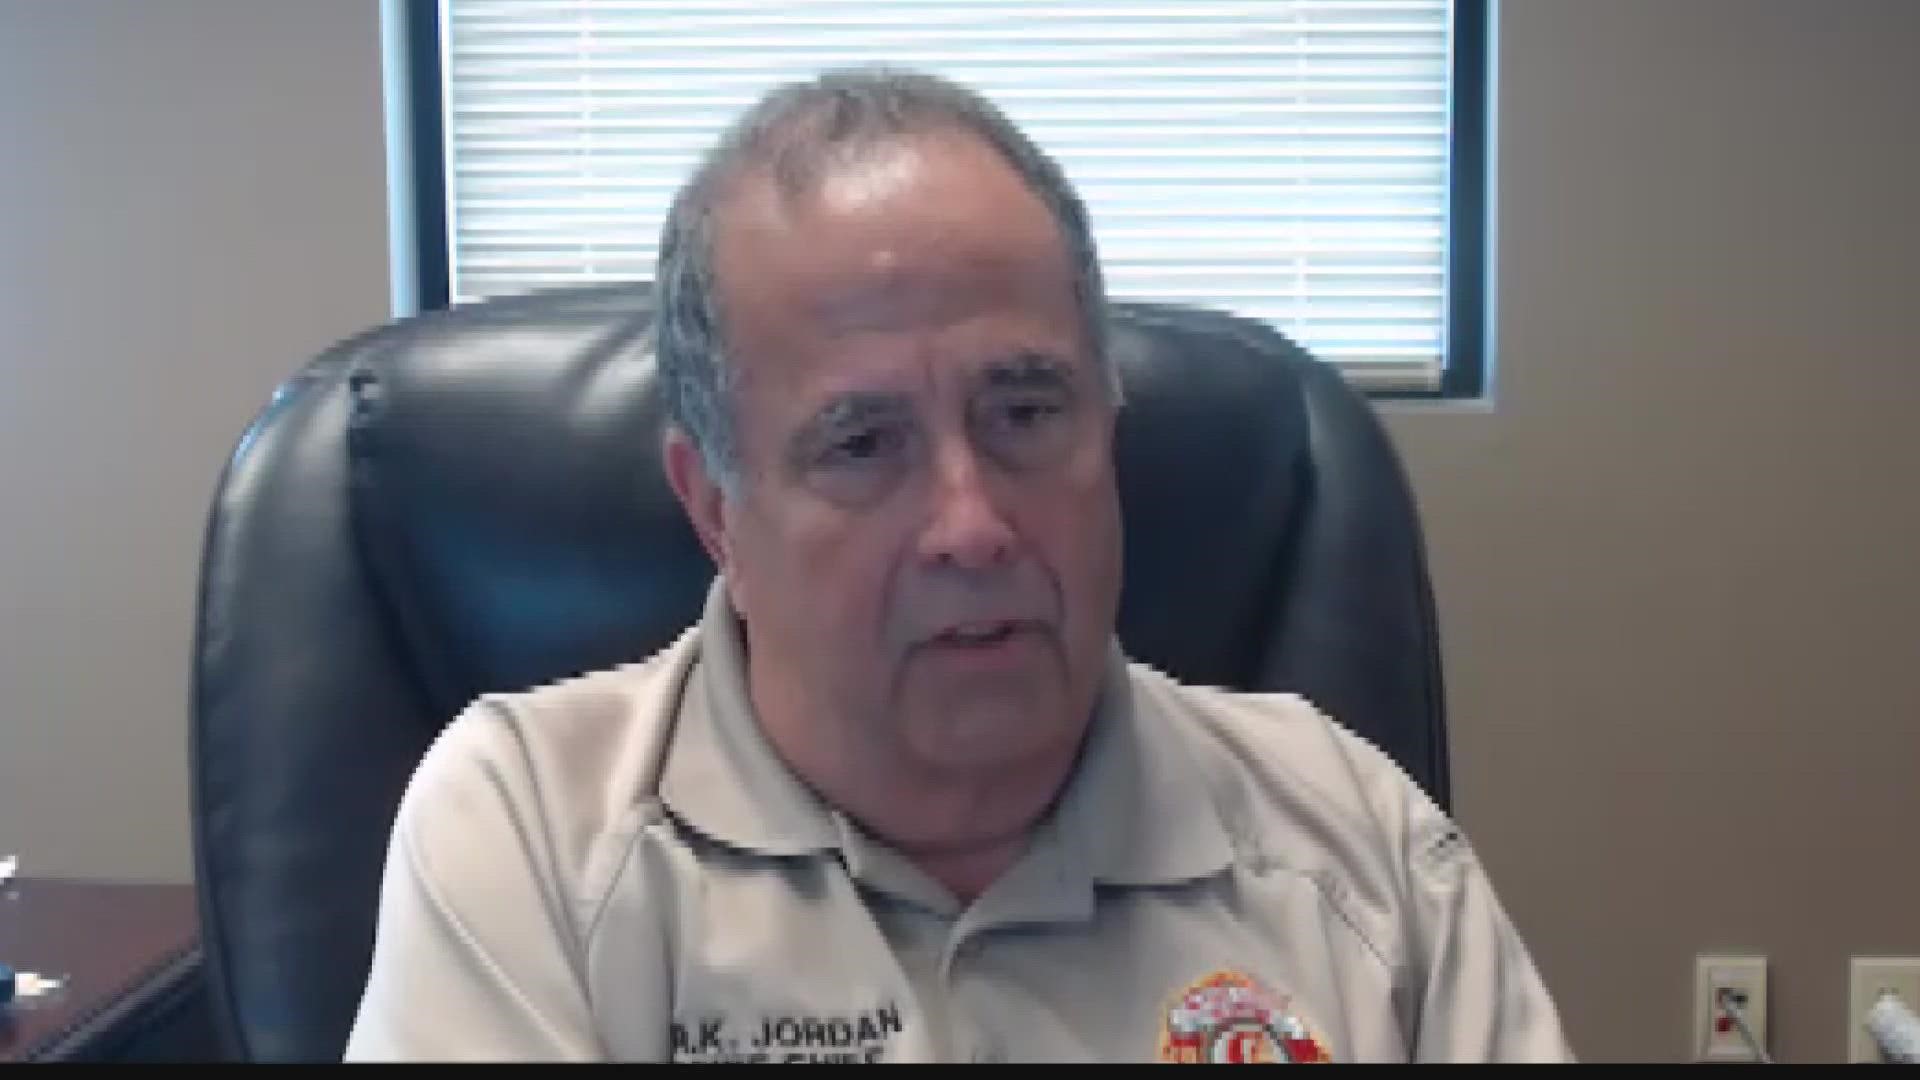 Glynn County Fire Rescue is down between 18-21 employees, according to Chief RK Jordan.